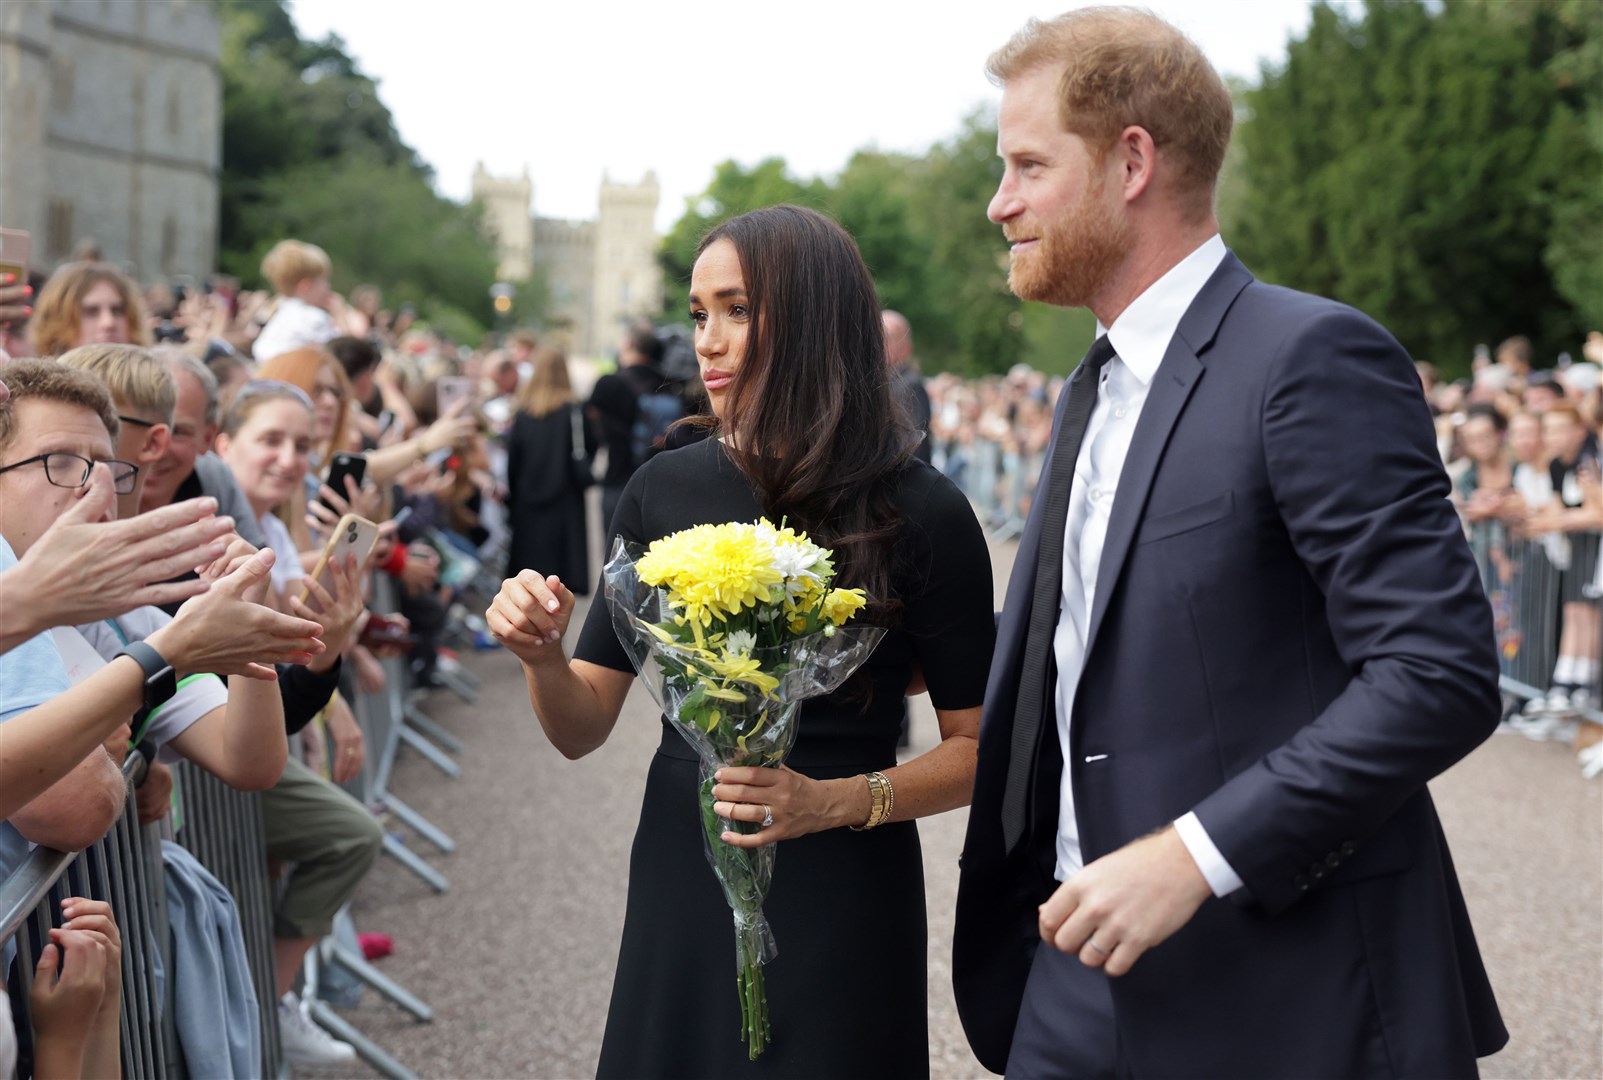 Harry and Meghan met members of the public as they viewed the floral tributes at Windsor Castle on Saturday (Chris Jackson/PA)